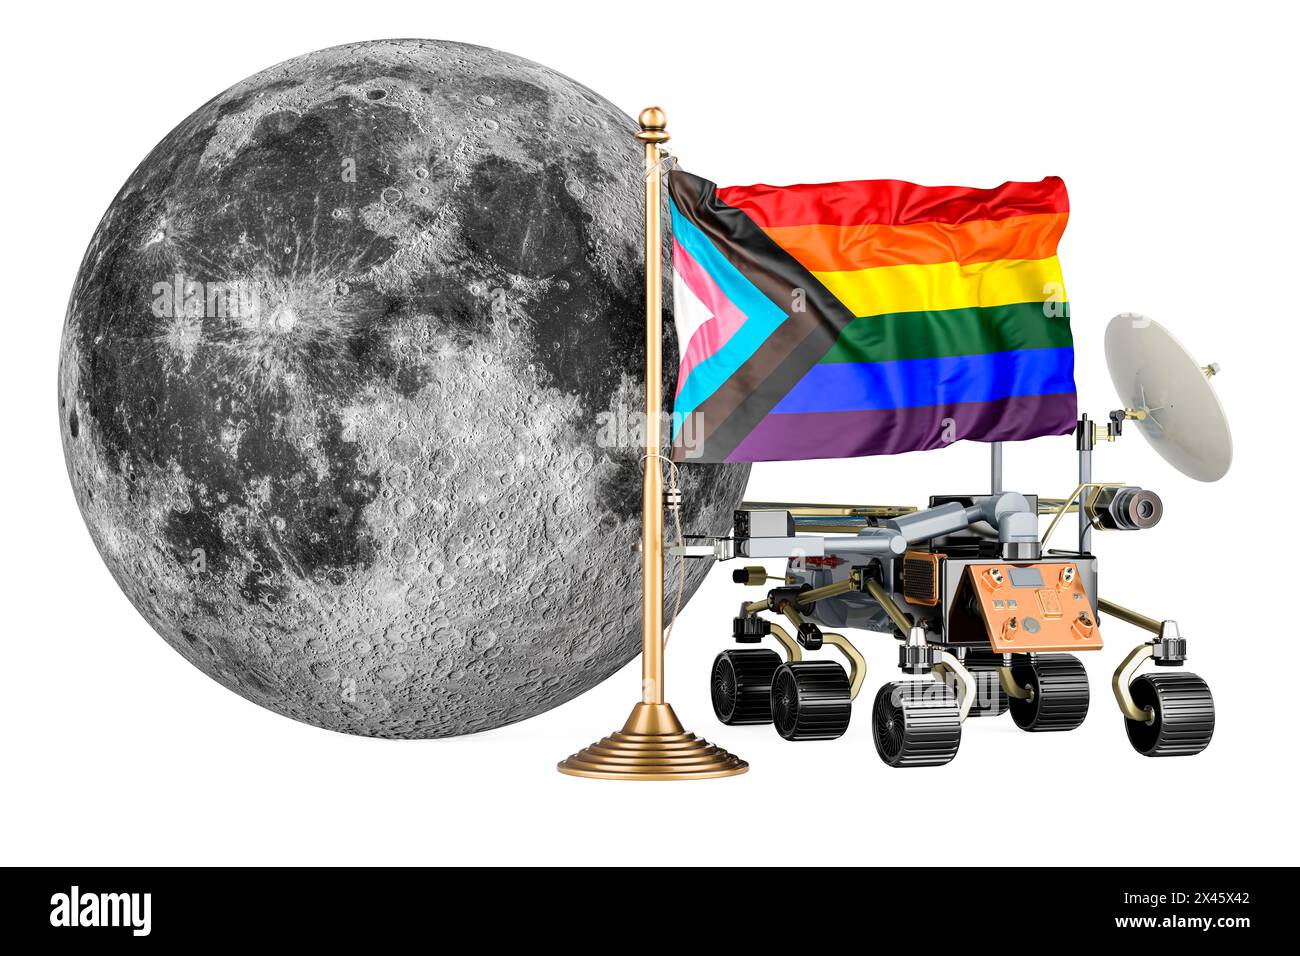 Planetary rover with Moon and LGBTQ flag. 3D rendering isolated on background Stock Photo